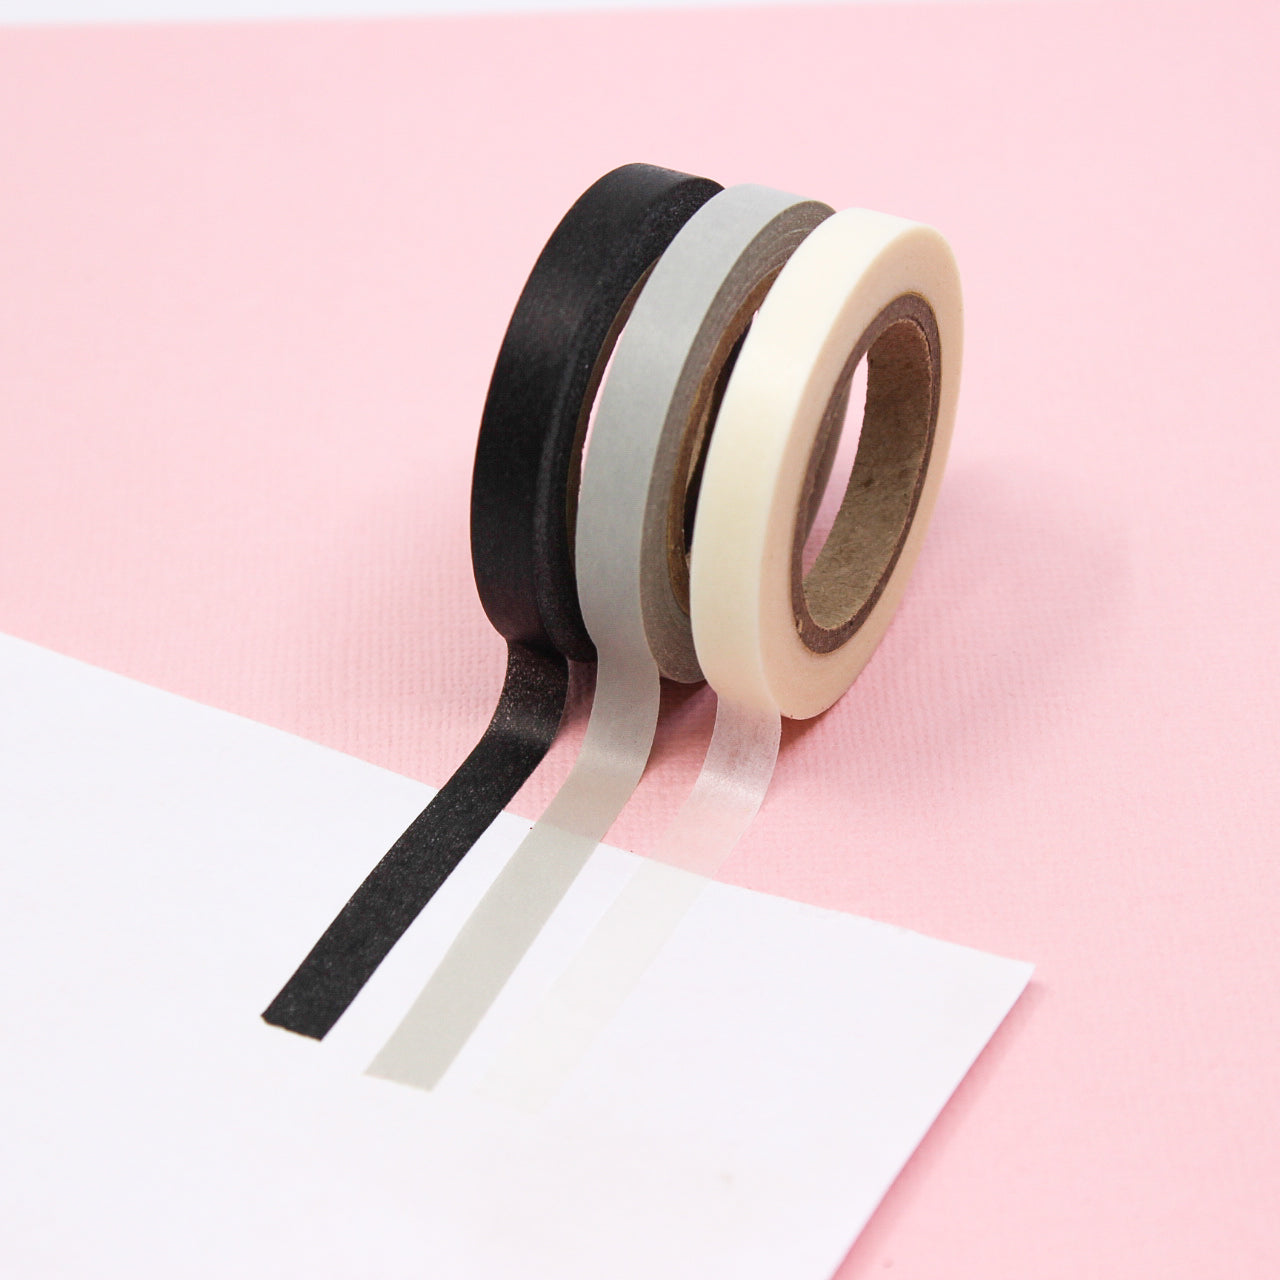 Elevate your crafts with our Neutral Color Narrow Solid Washi Tape Set. This set includes a versatile collection of narrow washi tapes in sophisticated neutral tones, ideal for adding a timeless and elegant touch to your projects. This tape is sold at BBB Supplies Craft Shop.